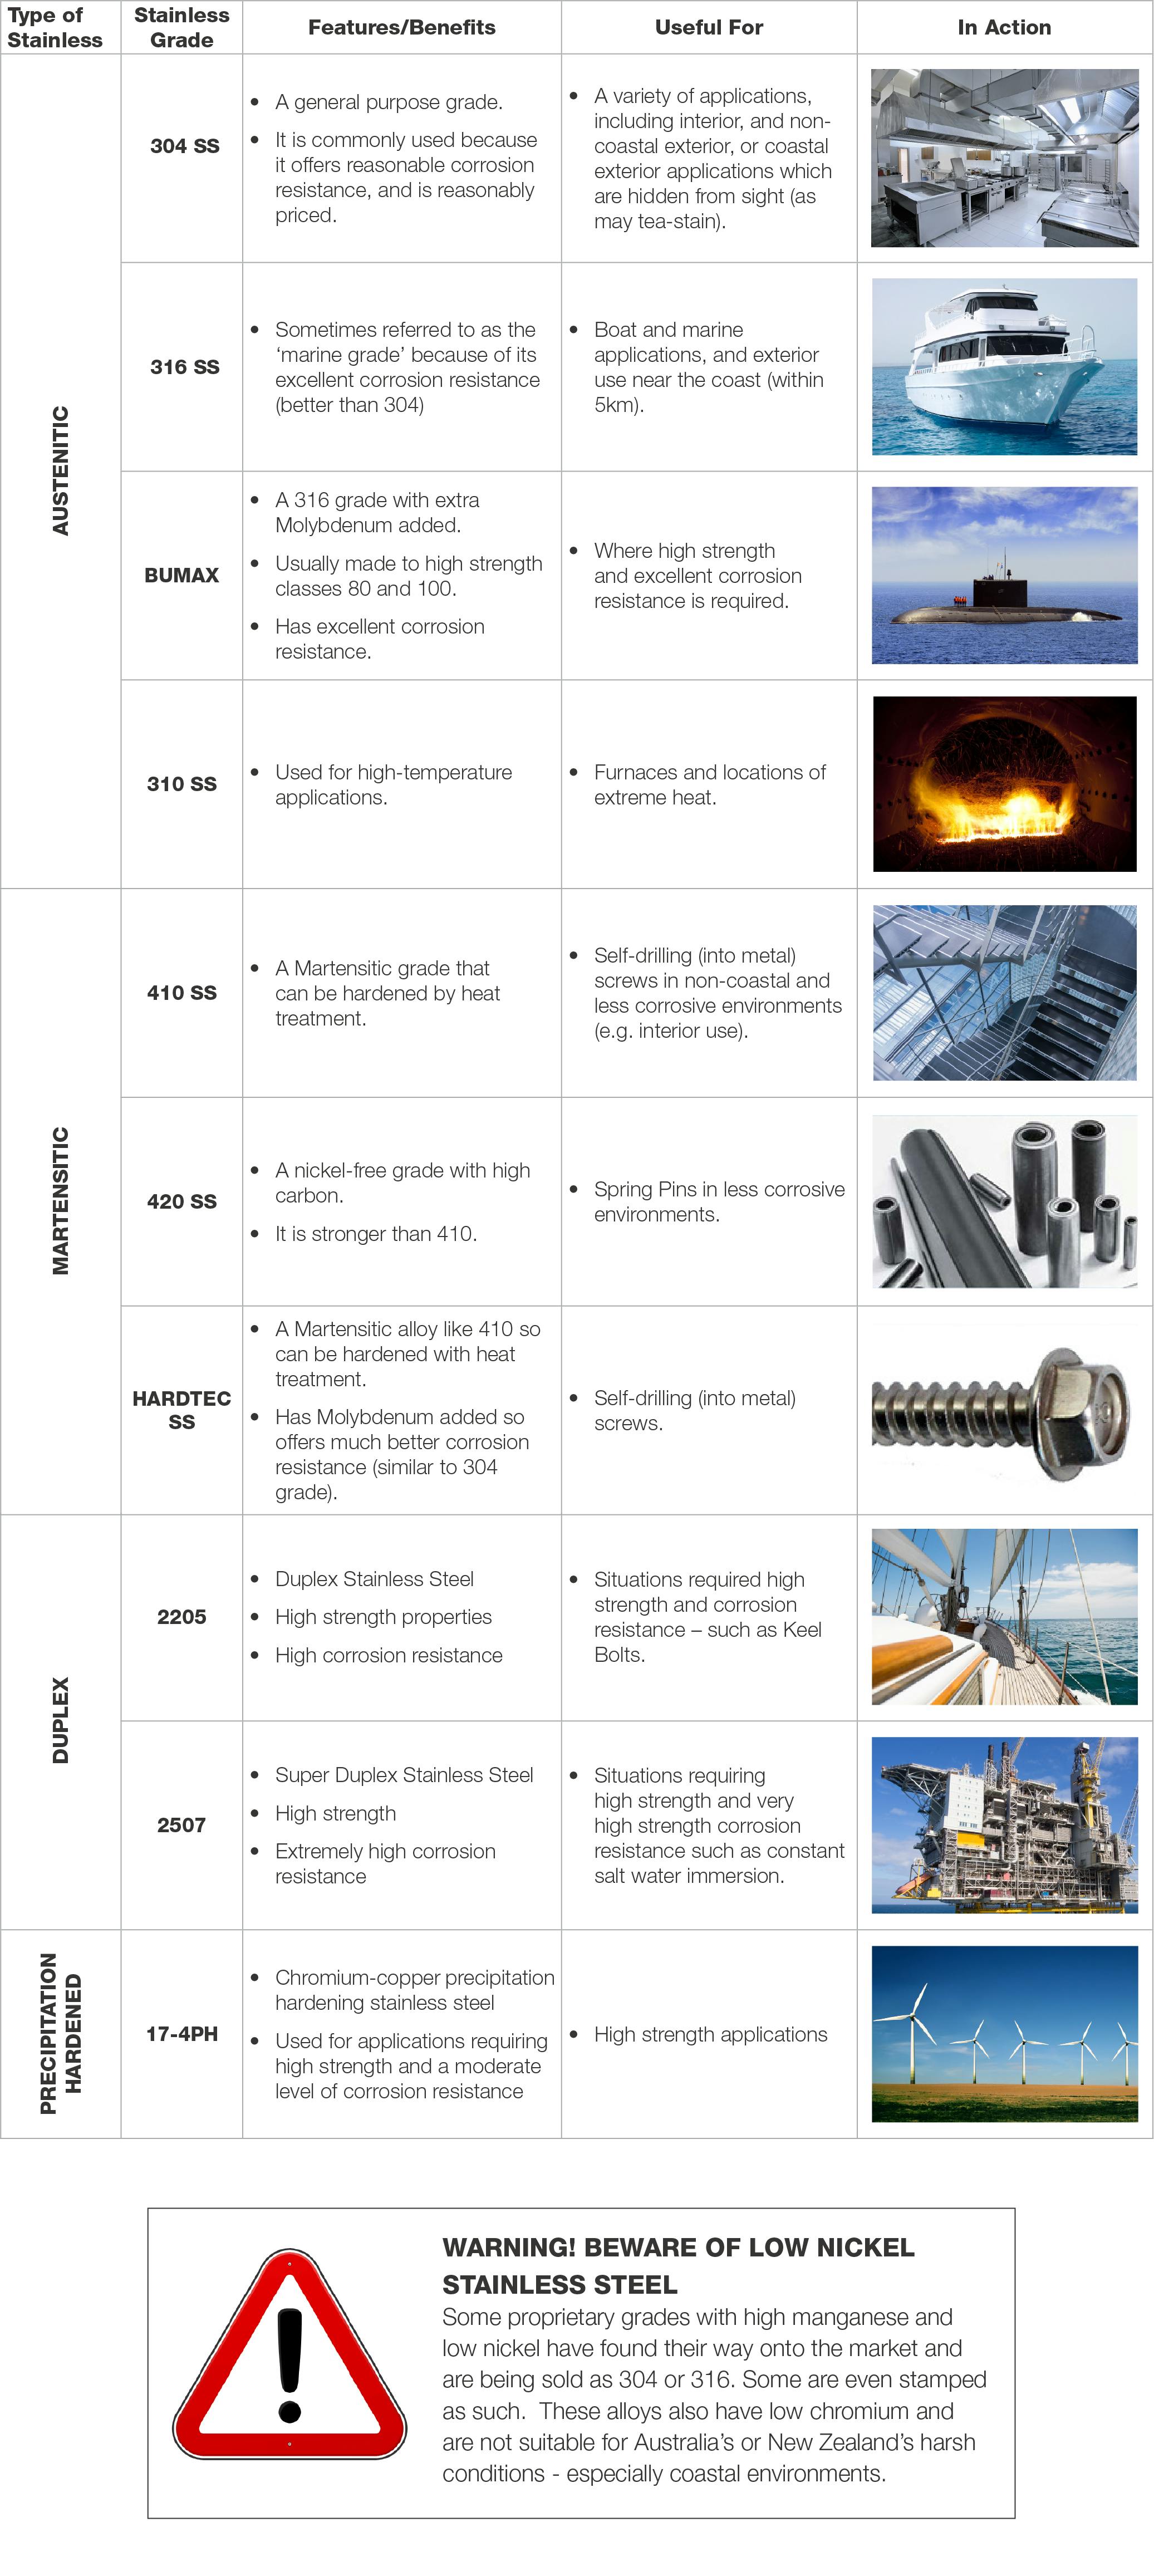 The different grades of stainless steel